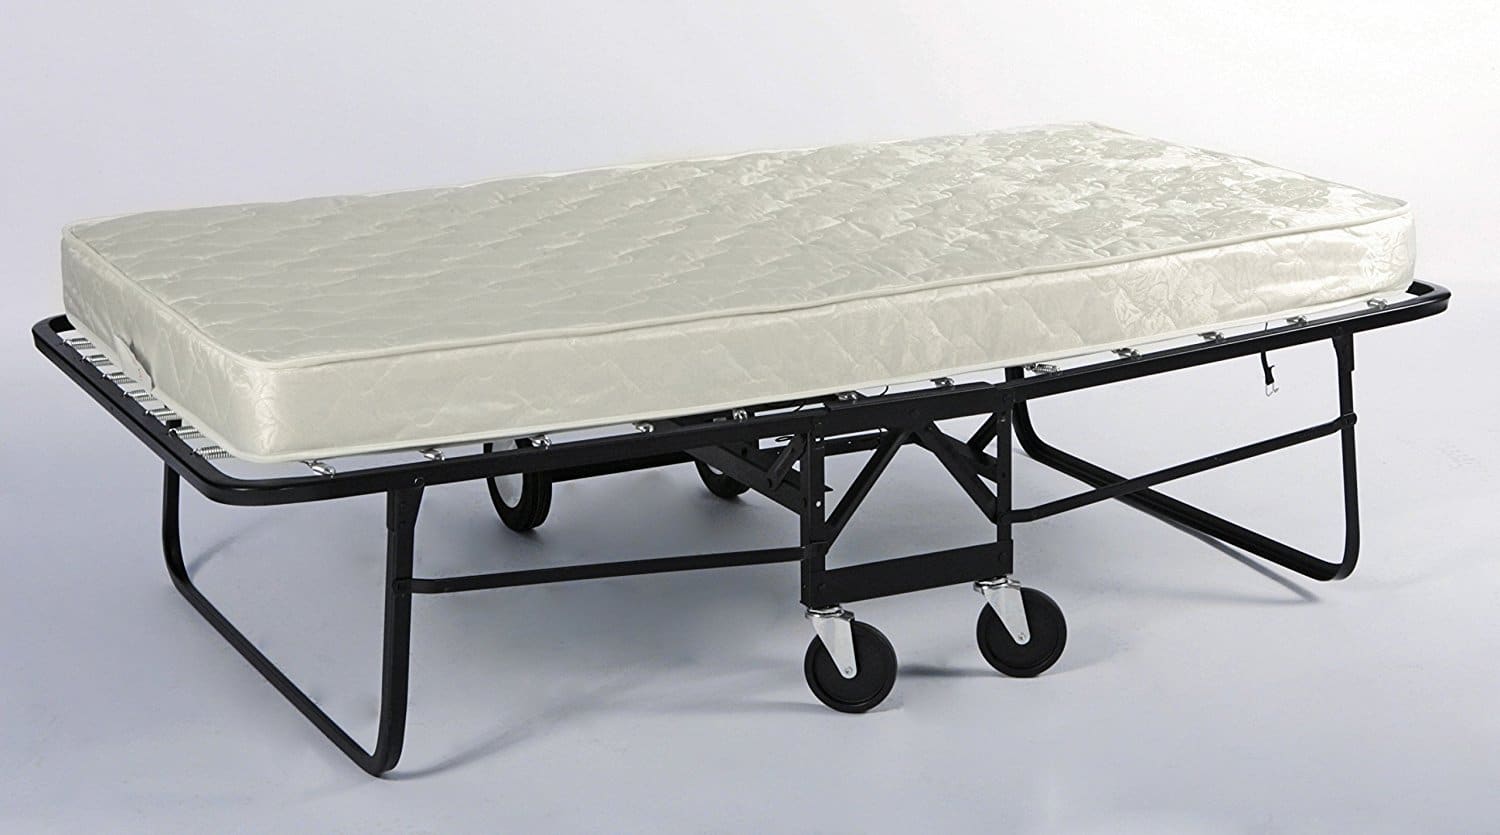 Hospitality Bed Tufted Premium Innerspring Mattress